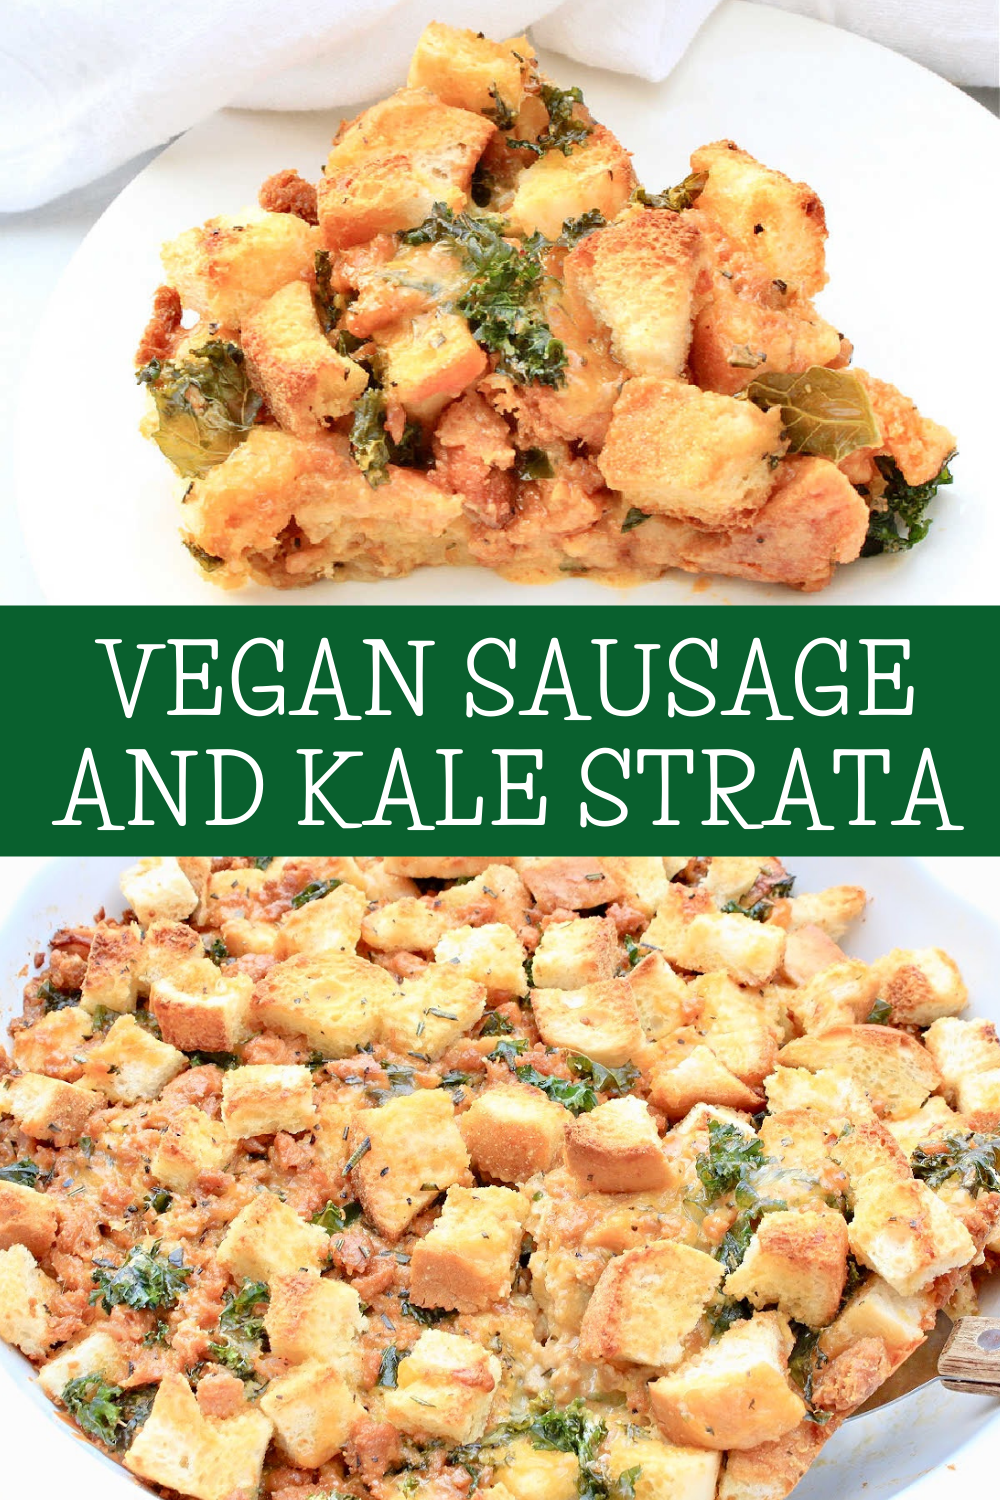 Vegan Sausage and Kale Strata ~ This savory, make-ahead casserole is perfect for holiday mornings, leisurely weekend breakfasts, or breakfast-for-dinner nights at home! via @thiswifecooks